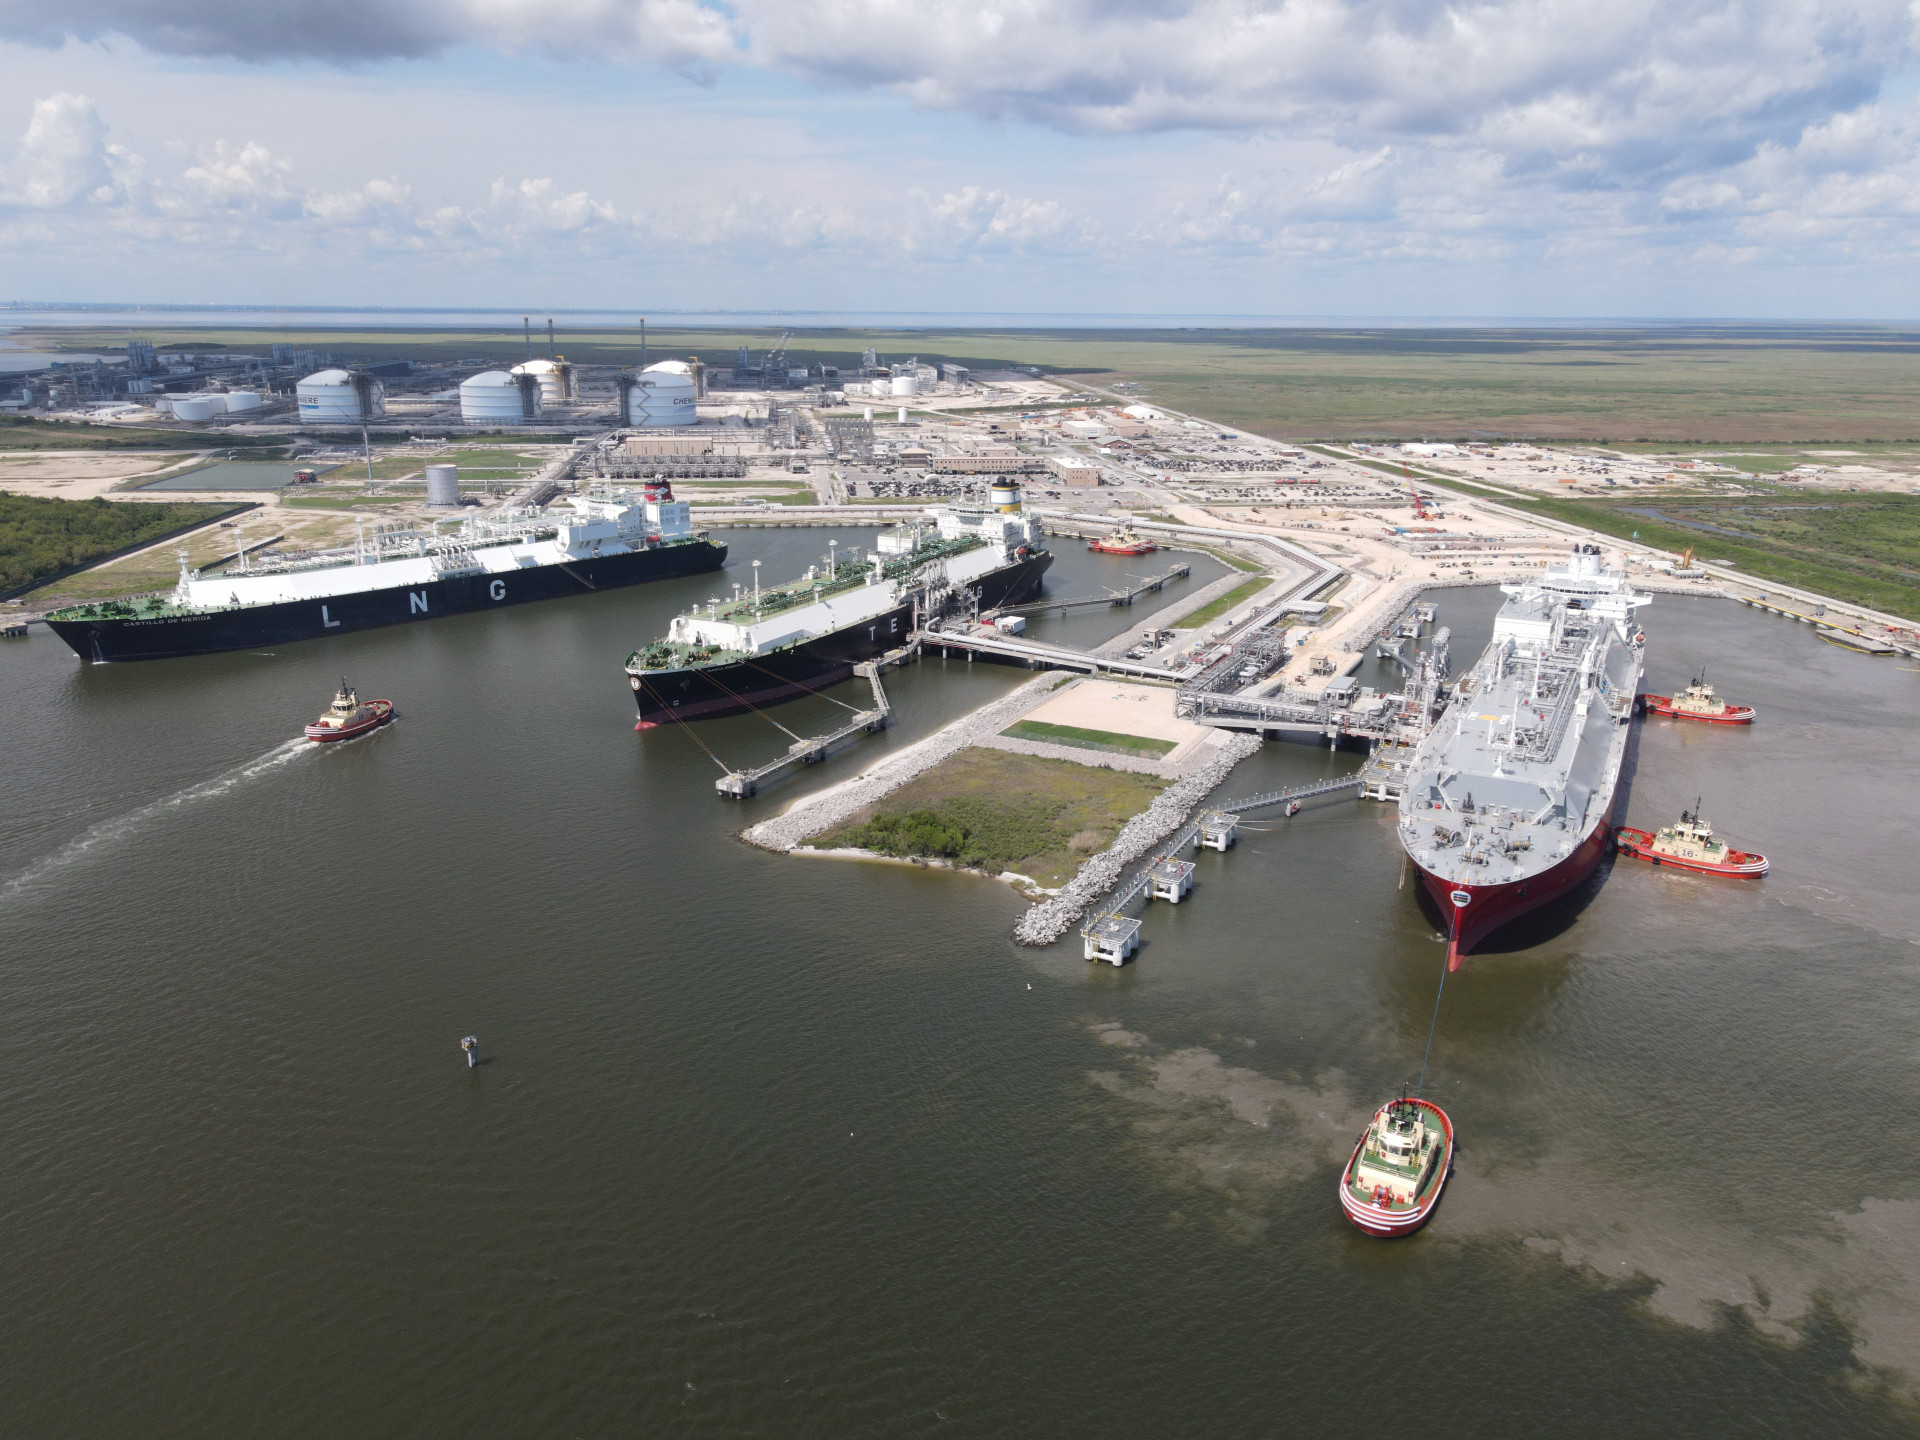 US weekly LNG exports rise to 24 cargoes